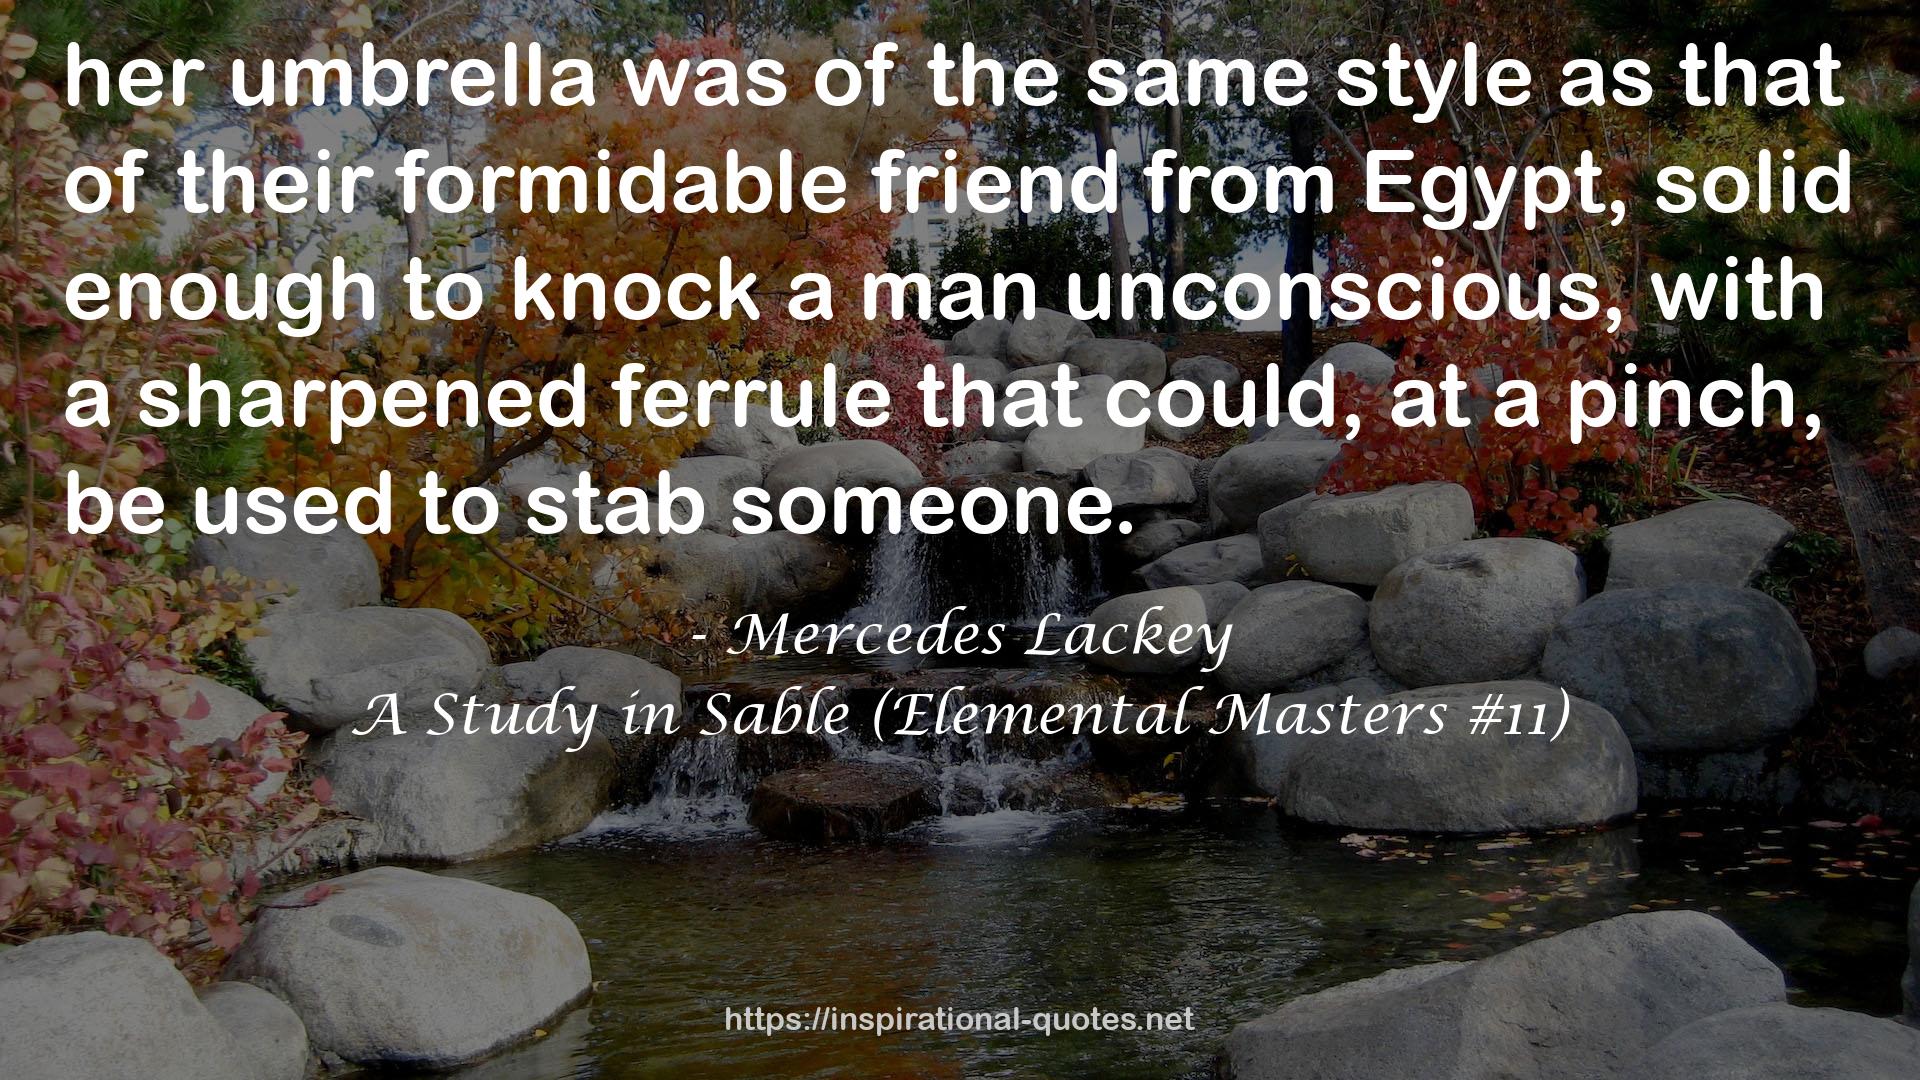 A Study in Sable (Elemental Masters #11) QUOTES